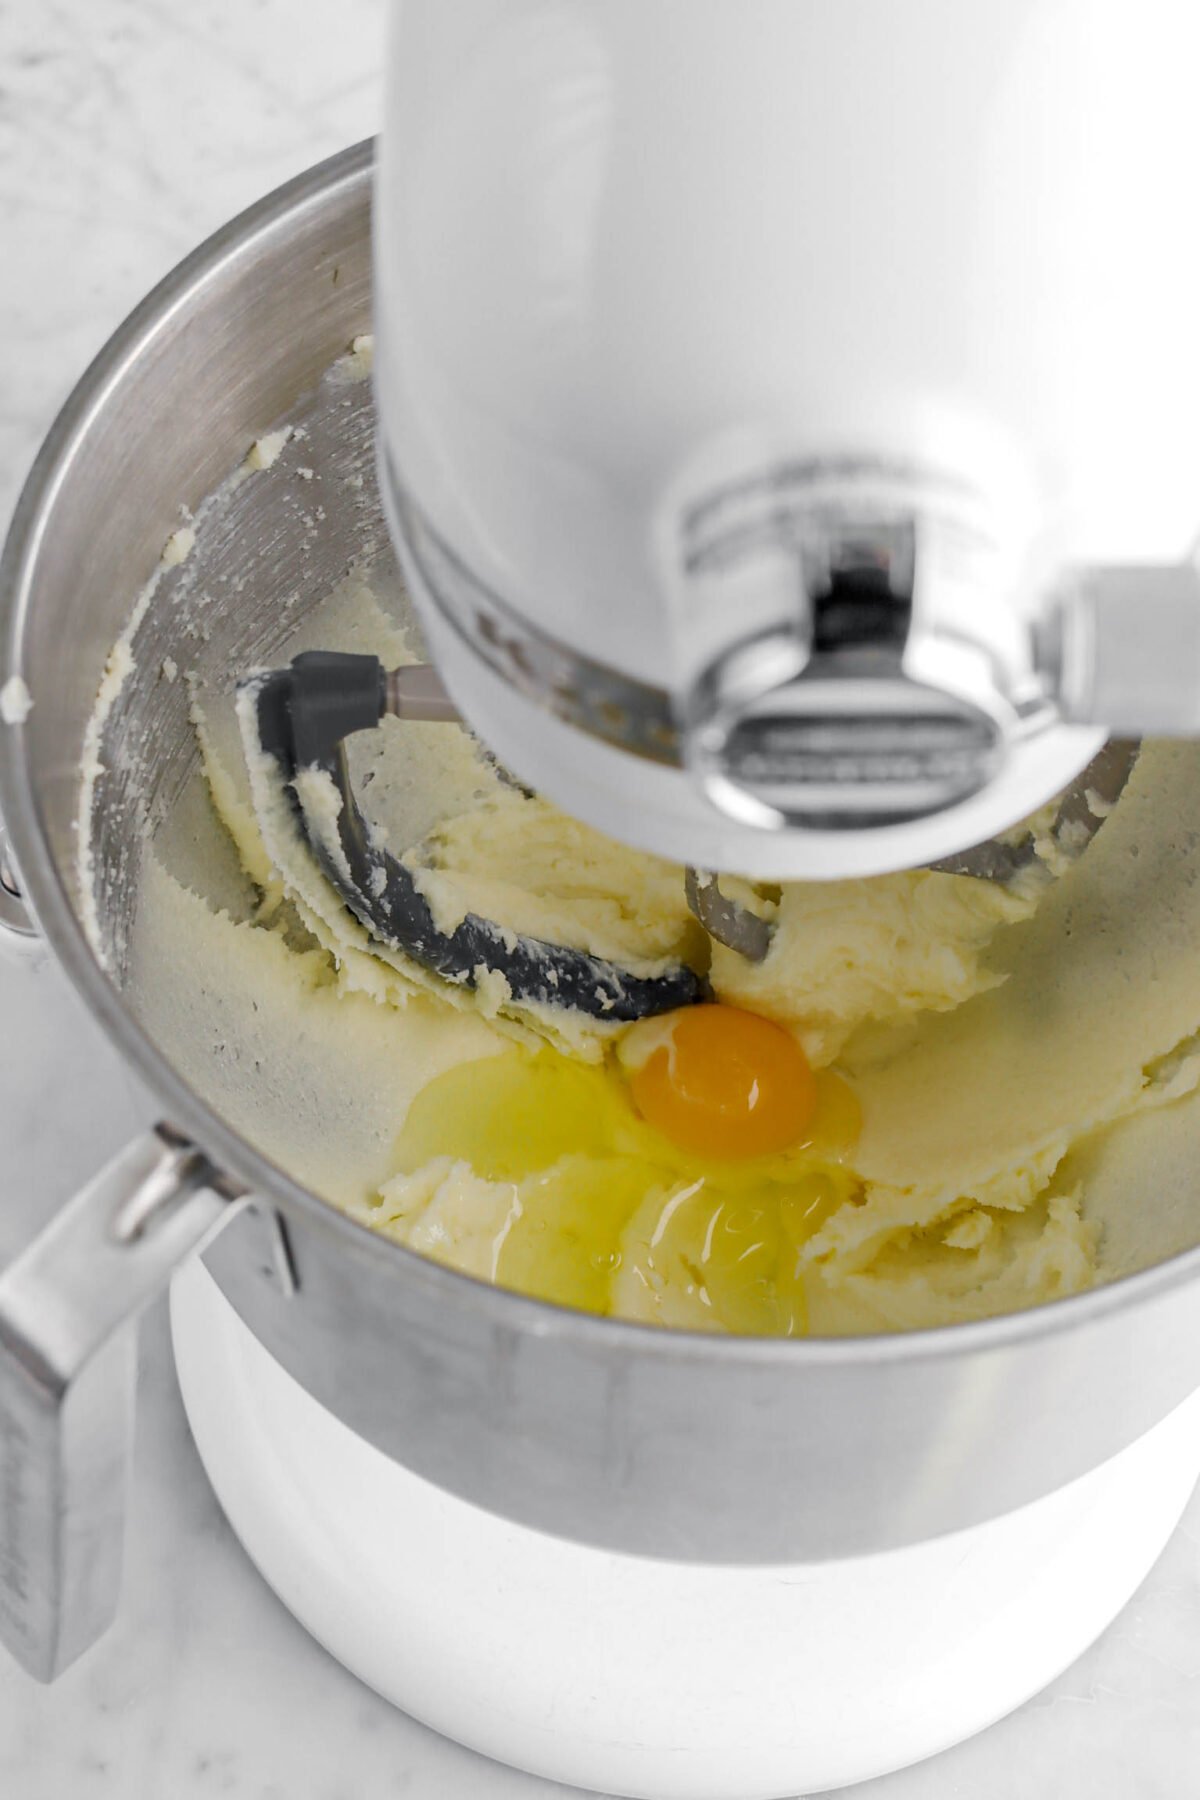 egg added to butter mixture.